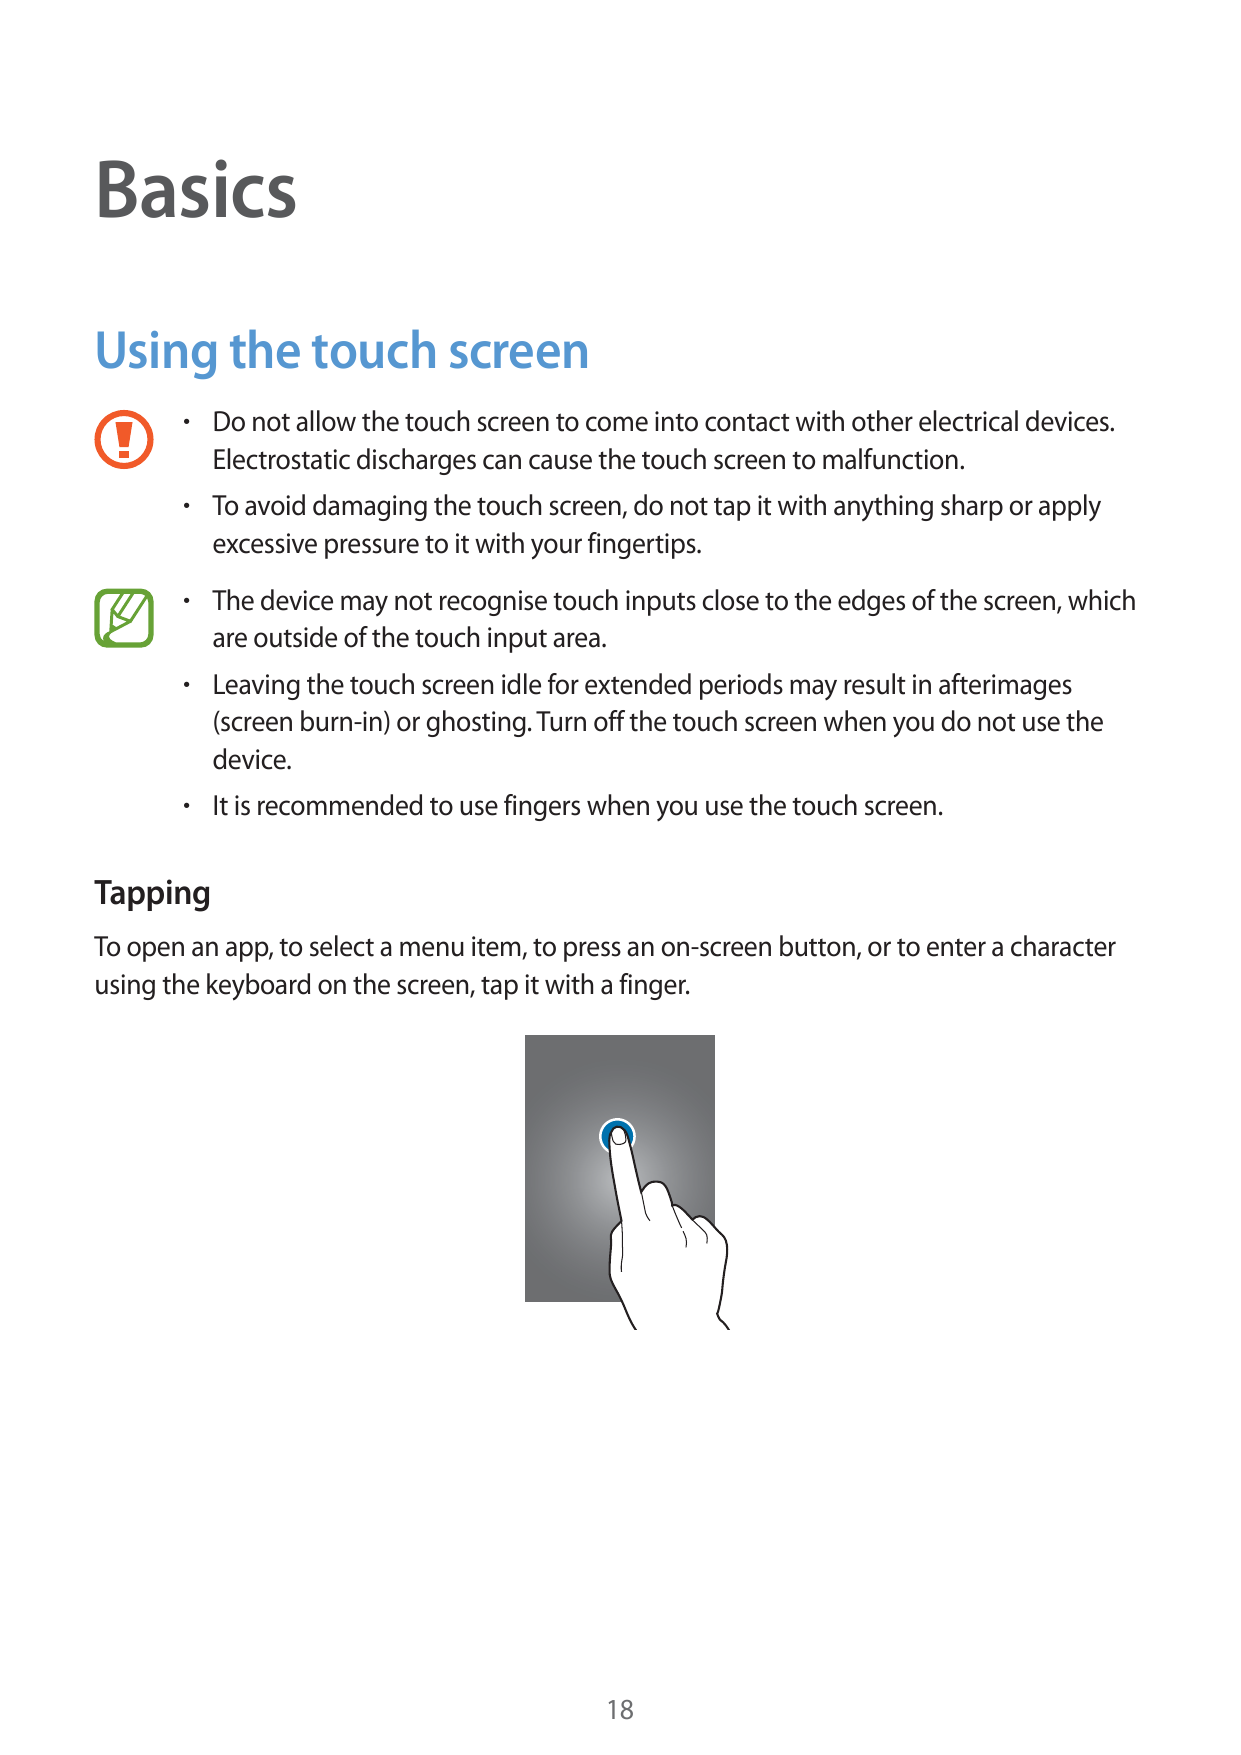 BasicsUsing the touch screenr Do not allow the touch screen to come into contact with other electrical devices.Electrostatic dis